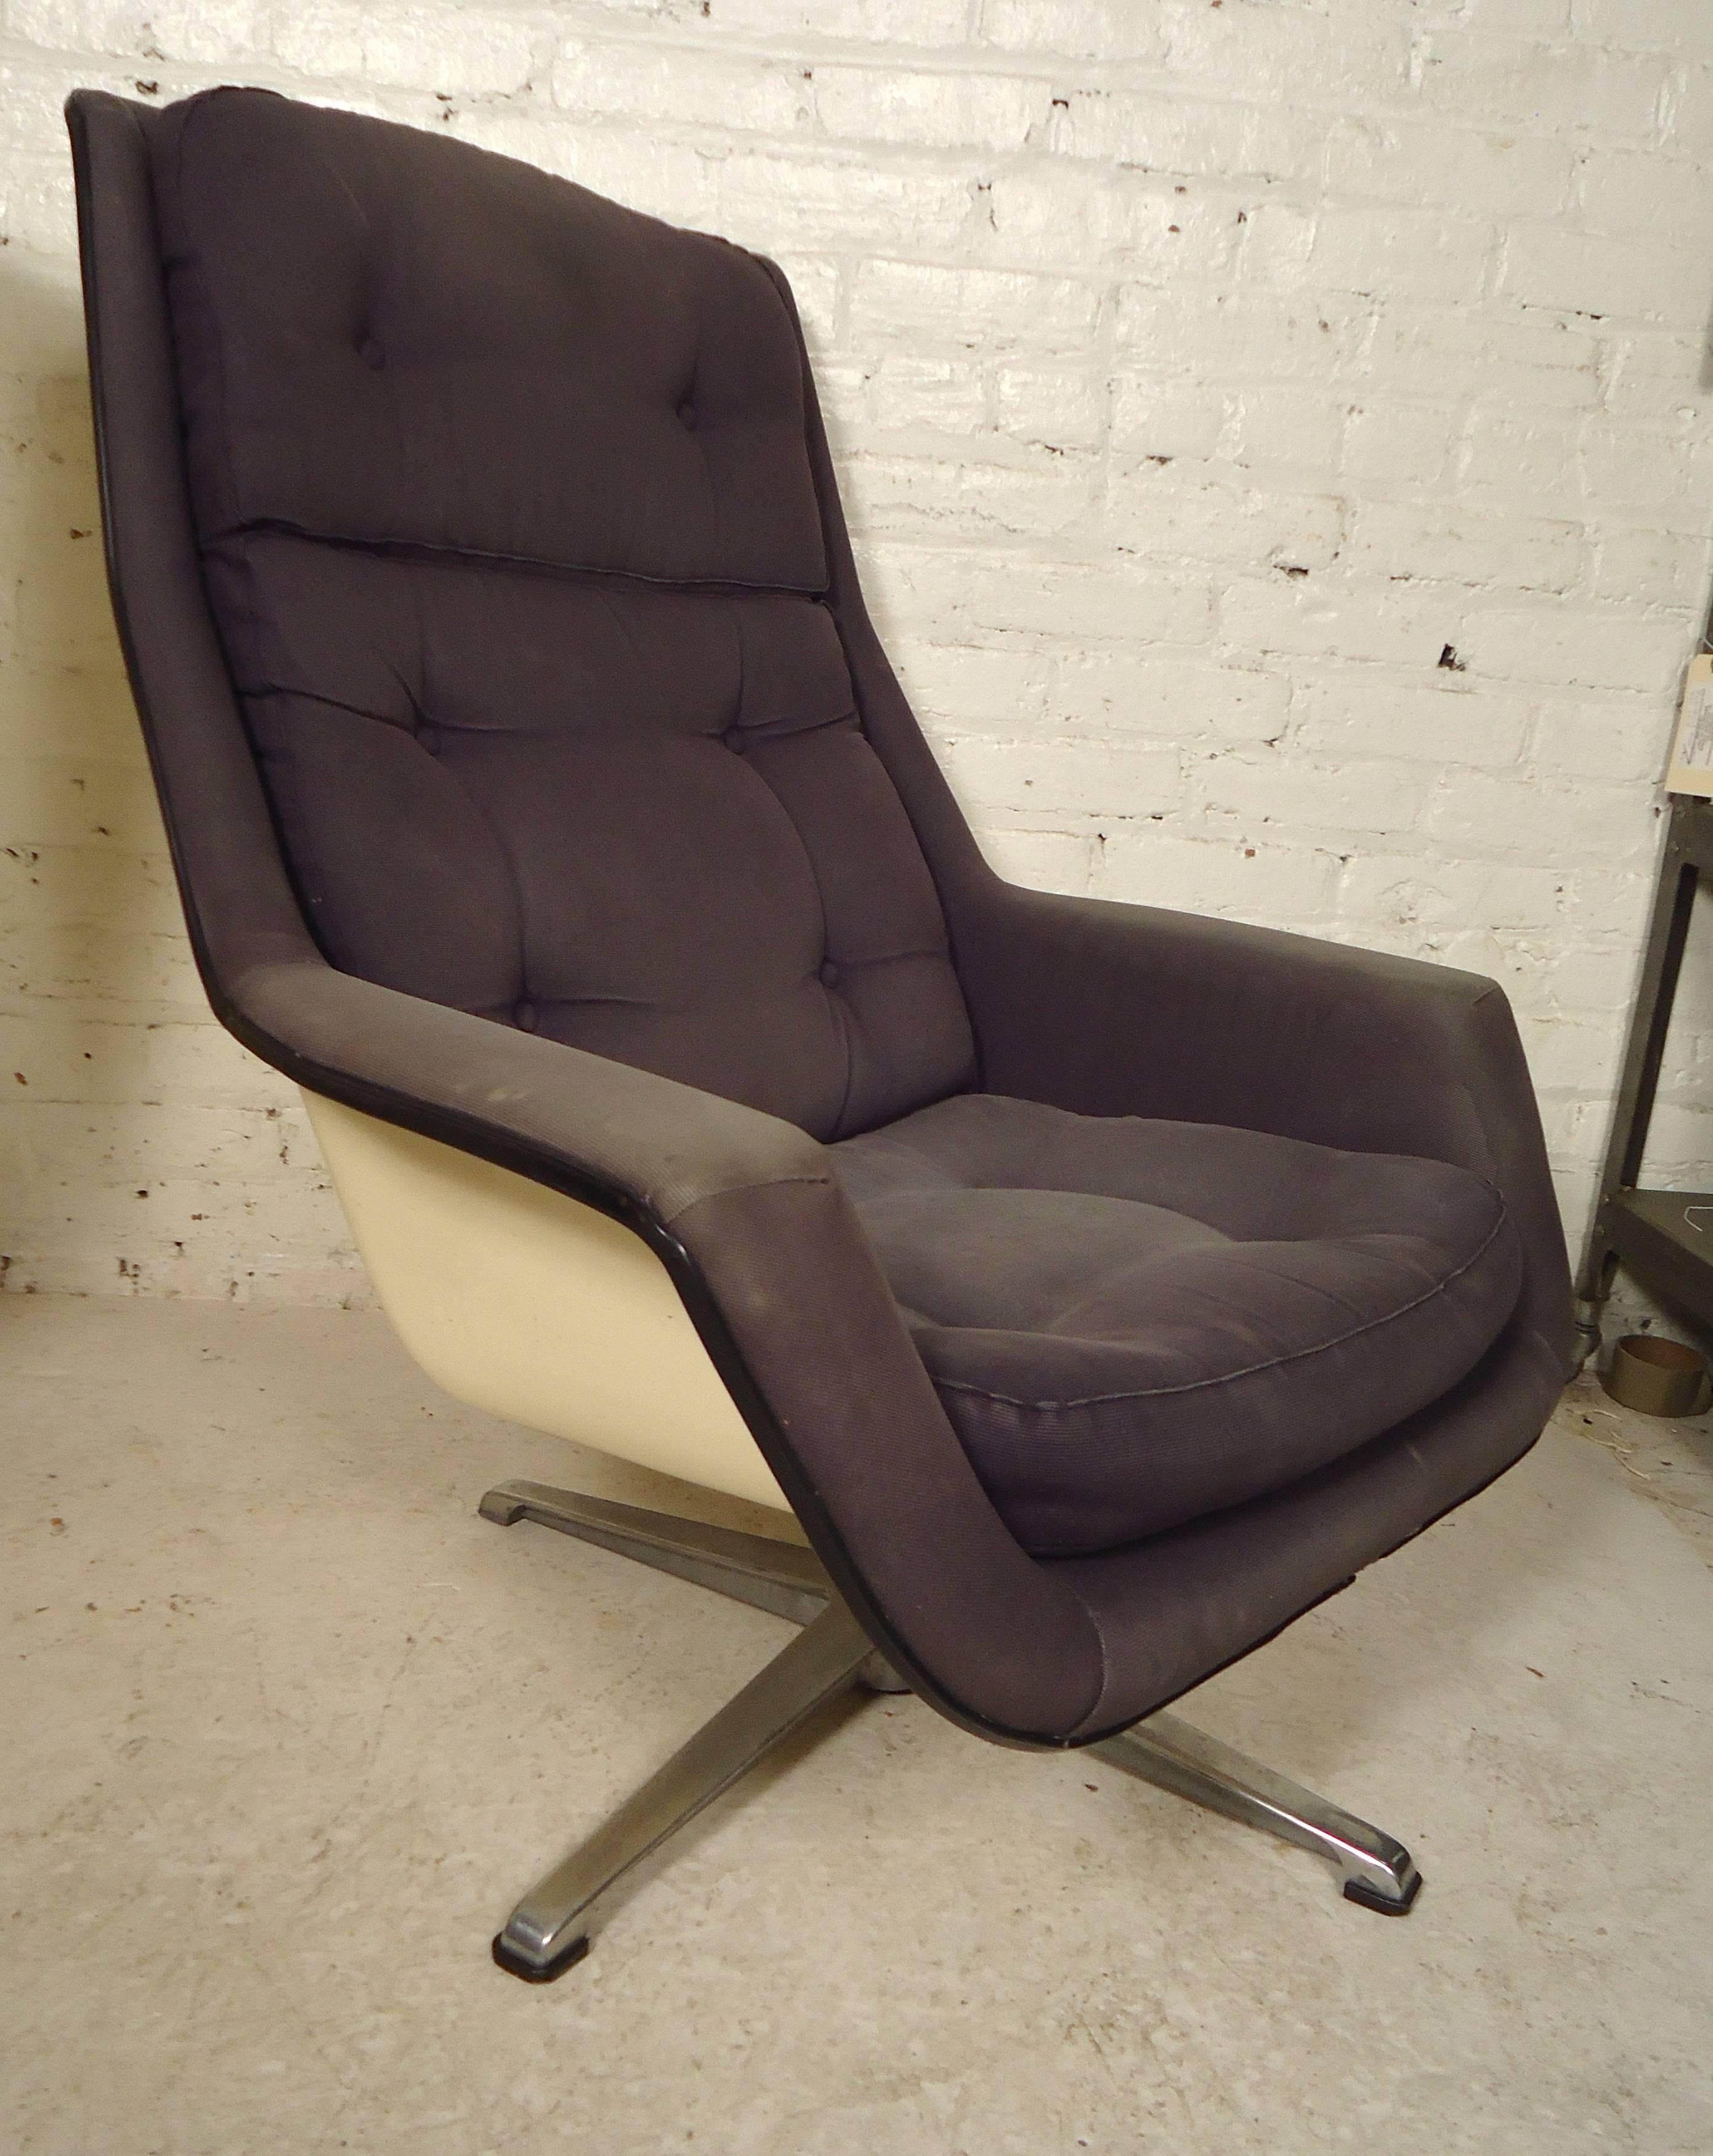 Pair of vintage swivel tall back chairs. White Eames style shells with cushioning set on metal bases. Unusual style that makes for a great pair of lounge chairs.

(Please confirm item location NY or NJ with dealer).
  